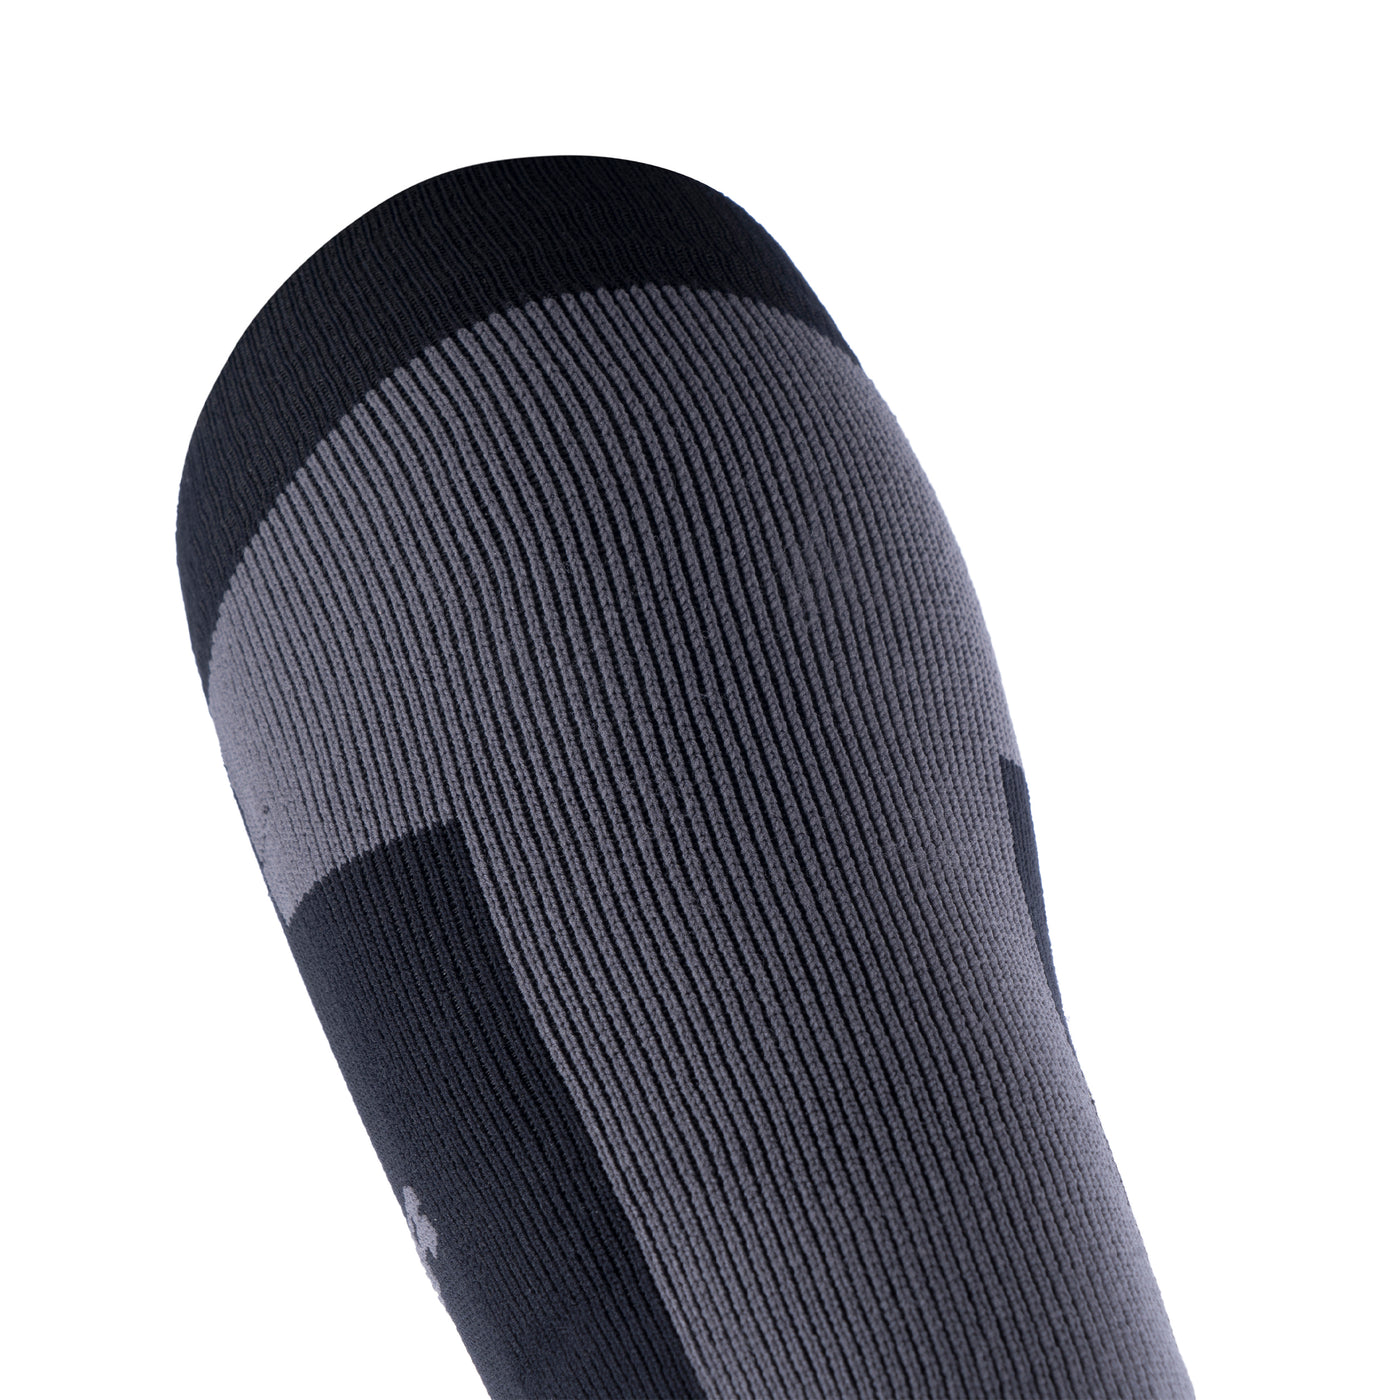 Mudgear maker of the best Compression Calf Sleeves 